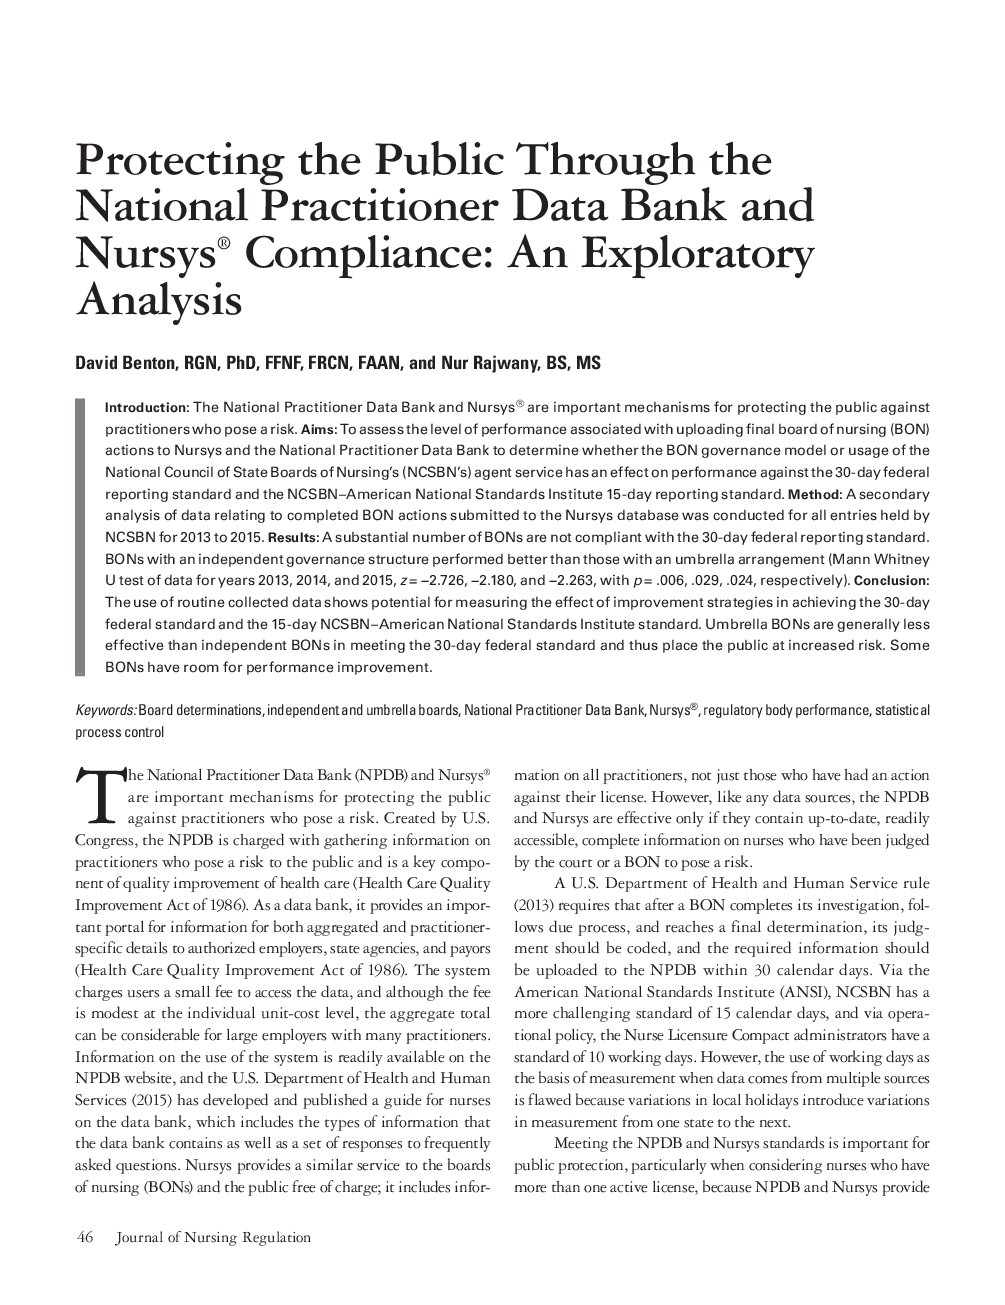 Protecting the Public Through the National Practitioner Data Bank and Nursys® Compliance: An Exploratory Analysis